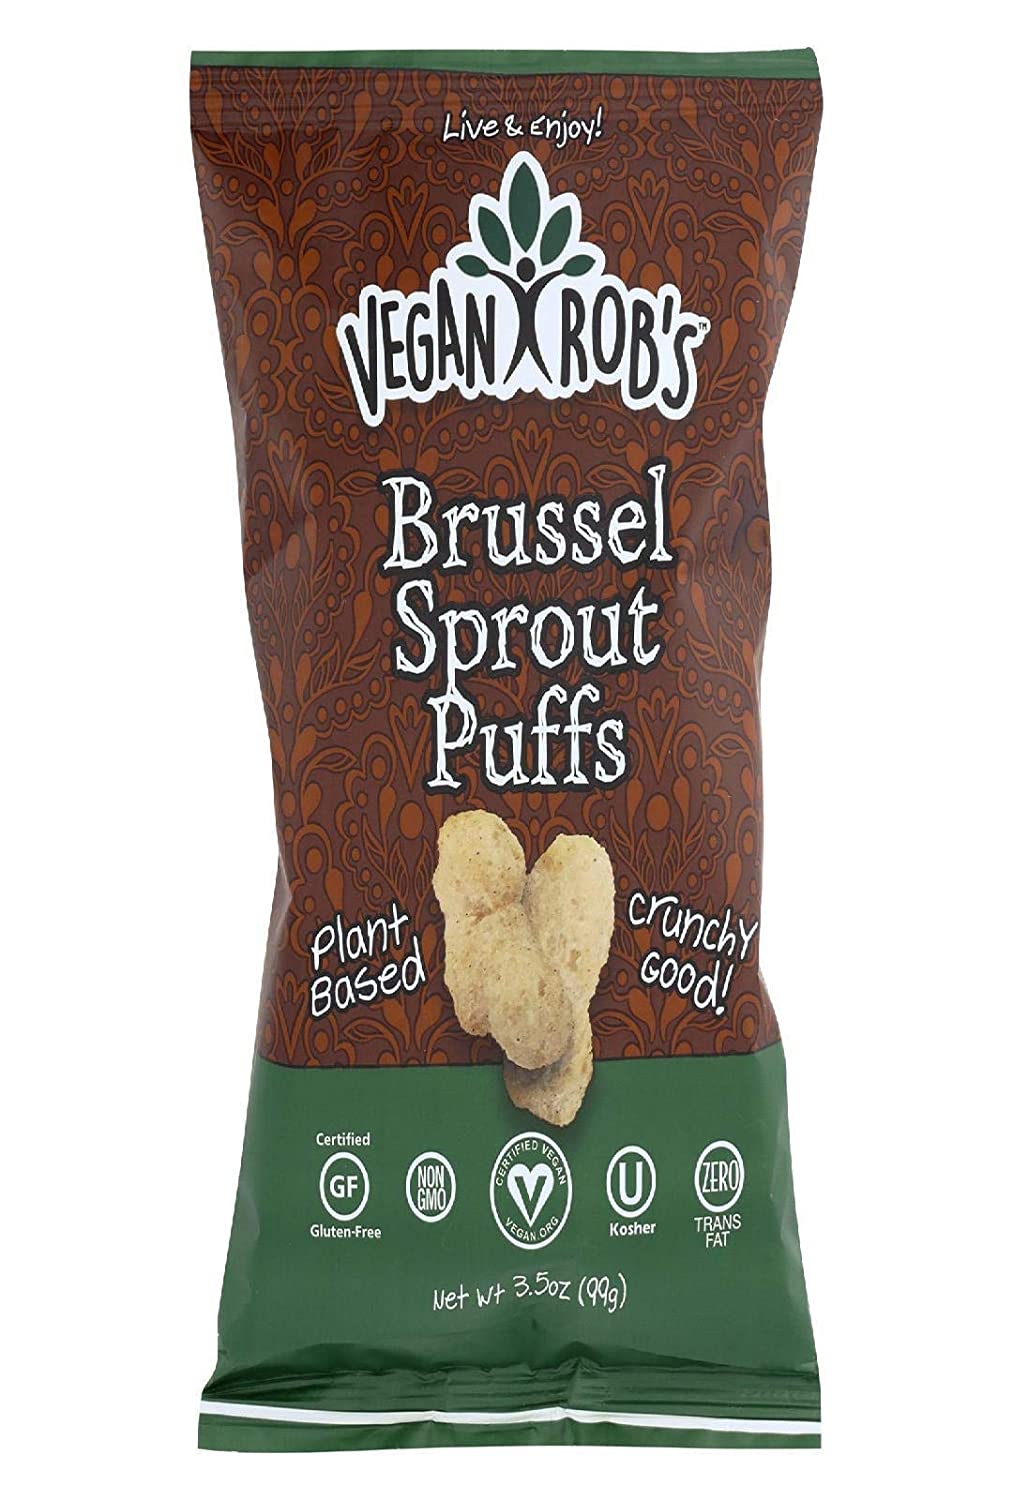 Vegan Rob's Sorghum Brussel Sprout Puffs 99g